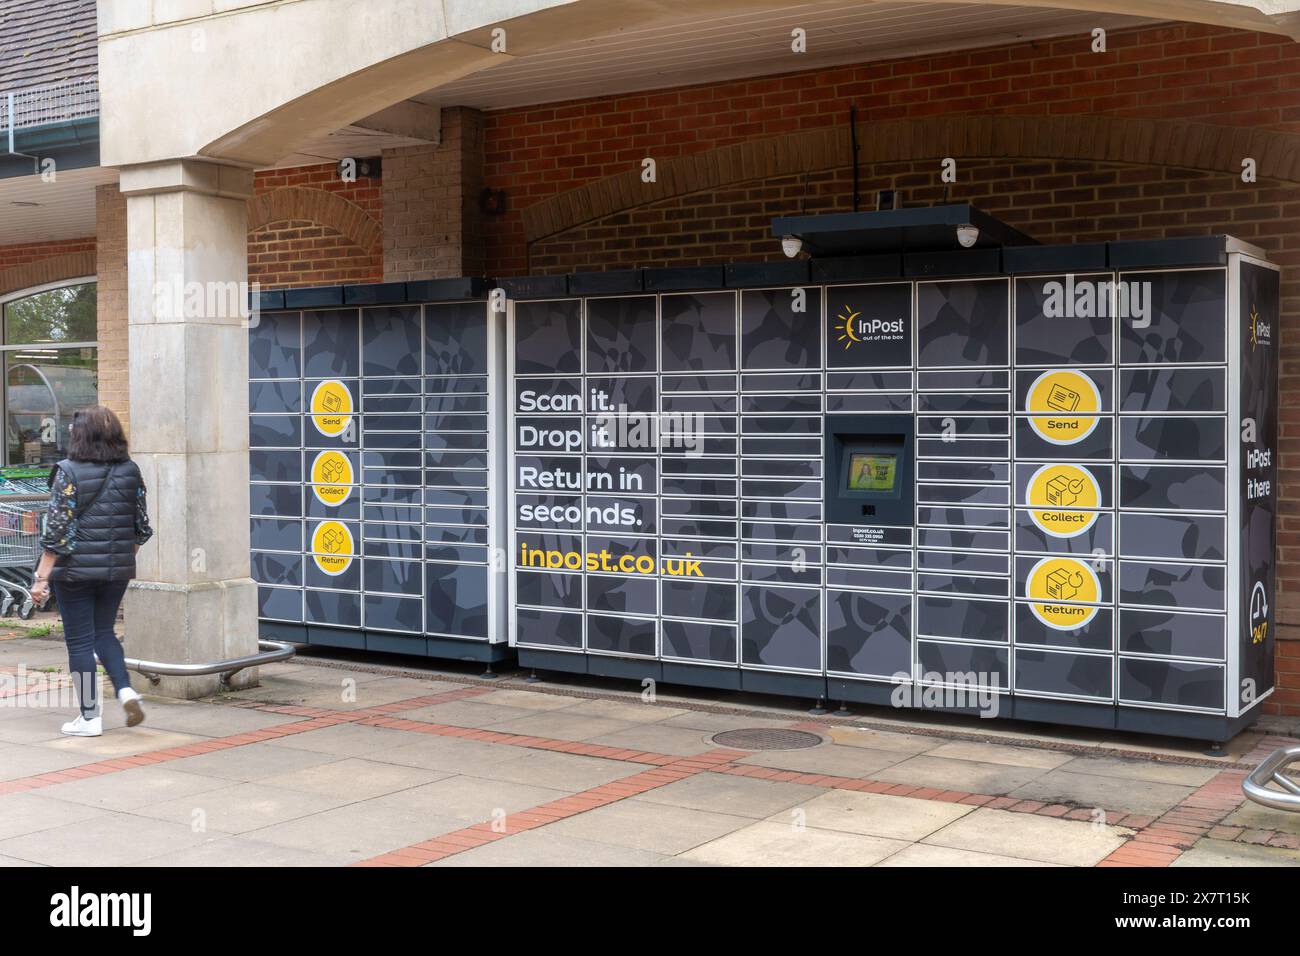 InPost parcel lockers for picking up deliveries or parcels, England, UK Stock Photo